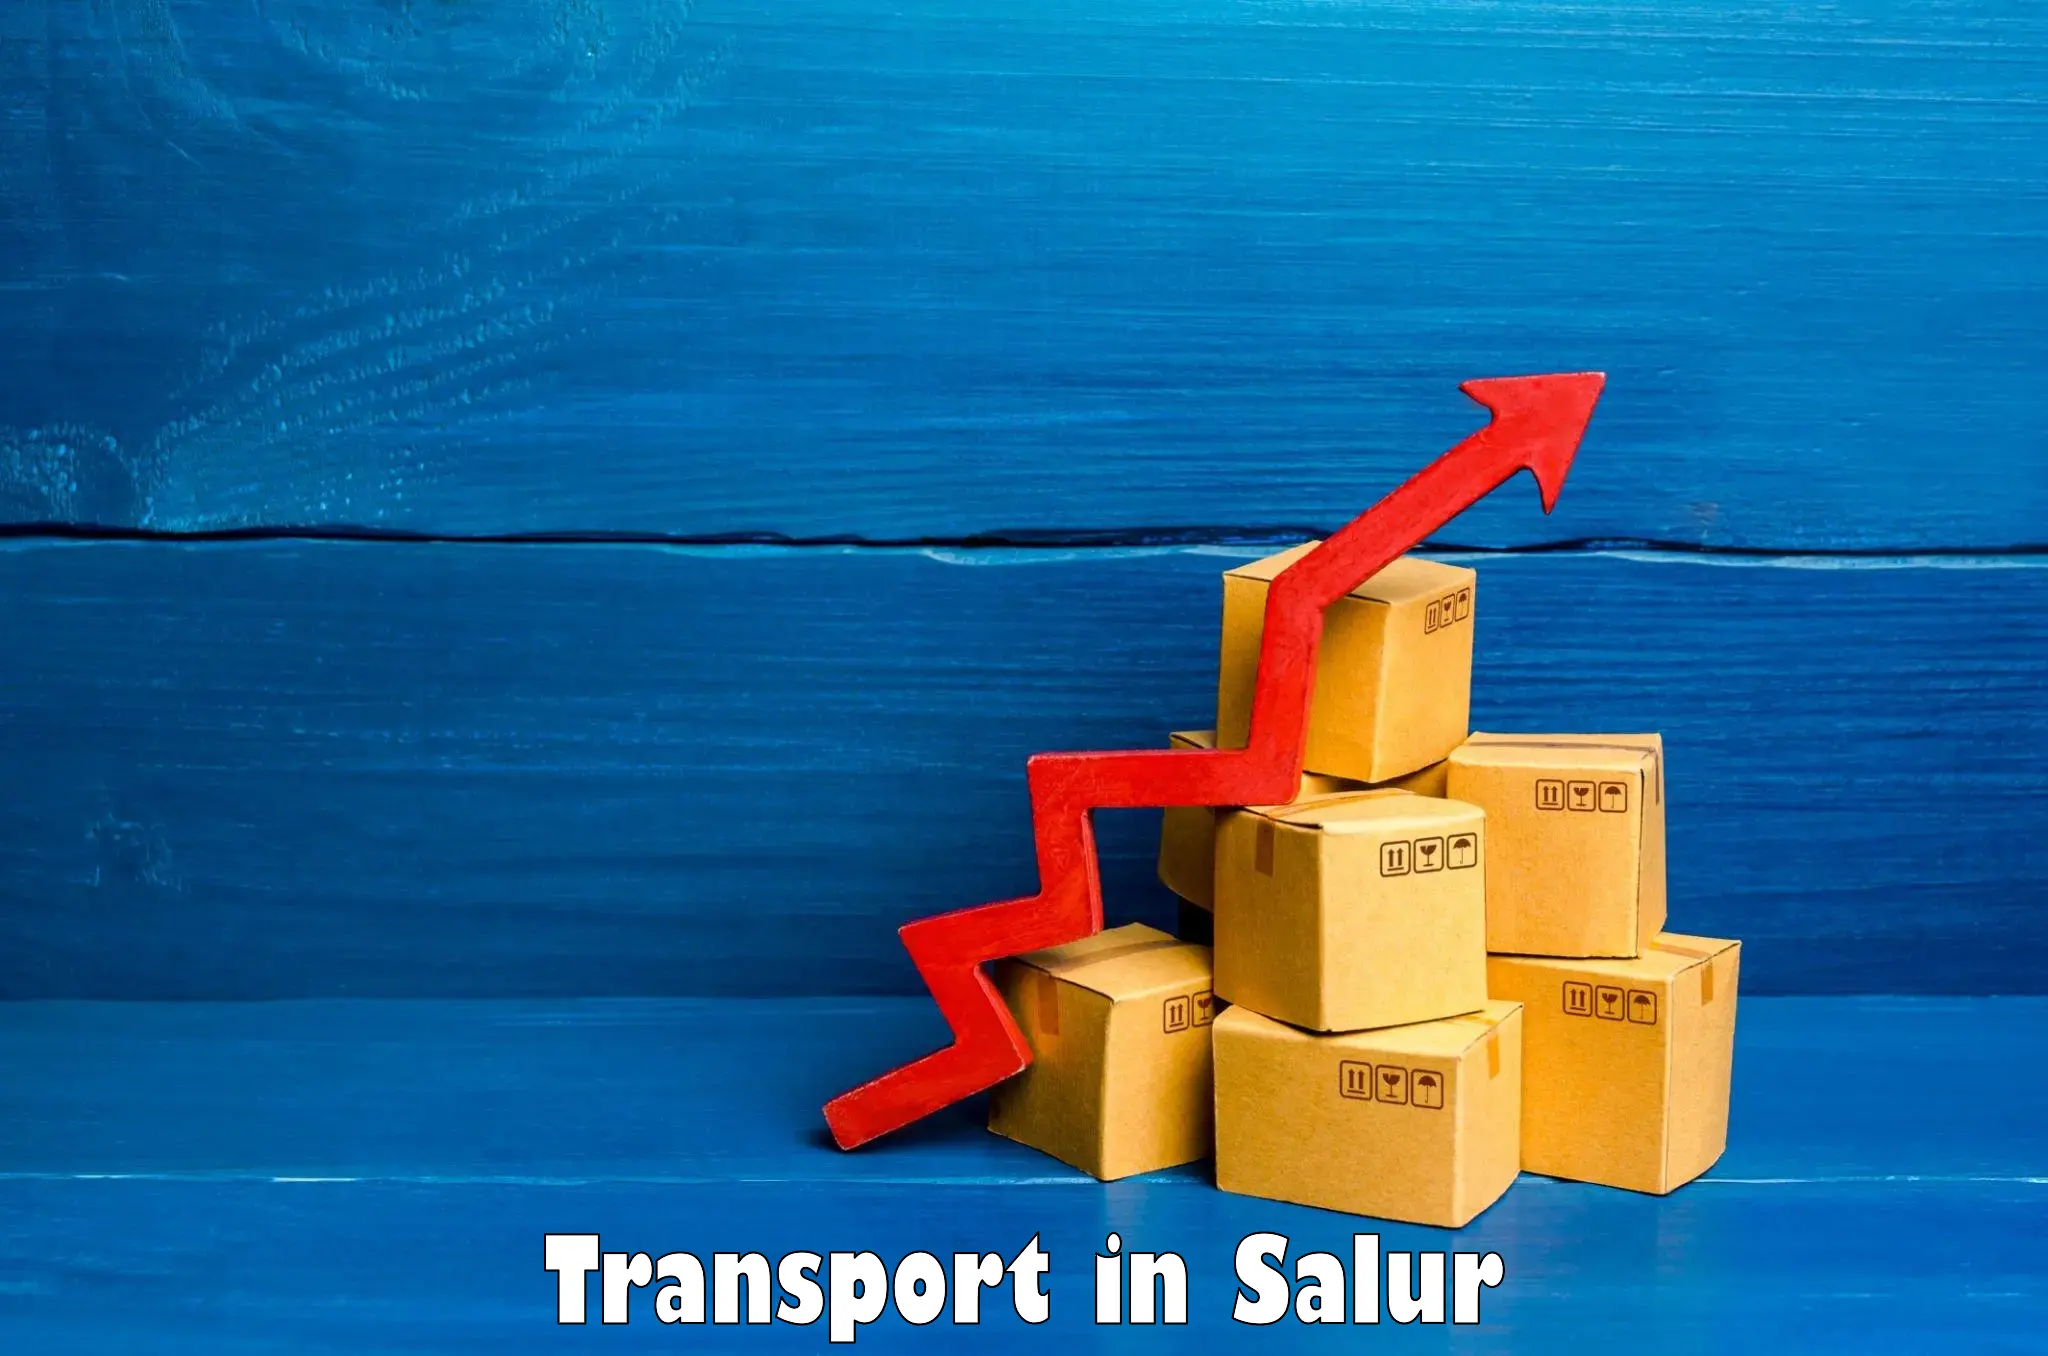 Container transport service in Salur